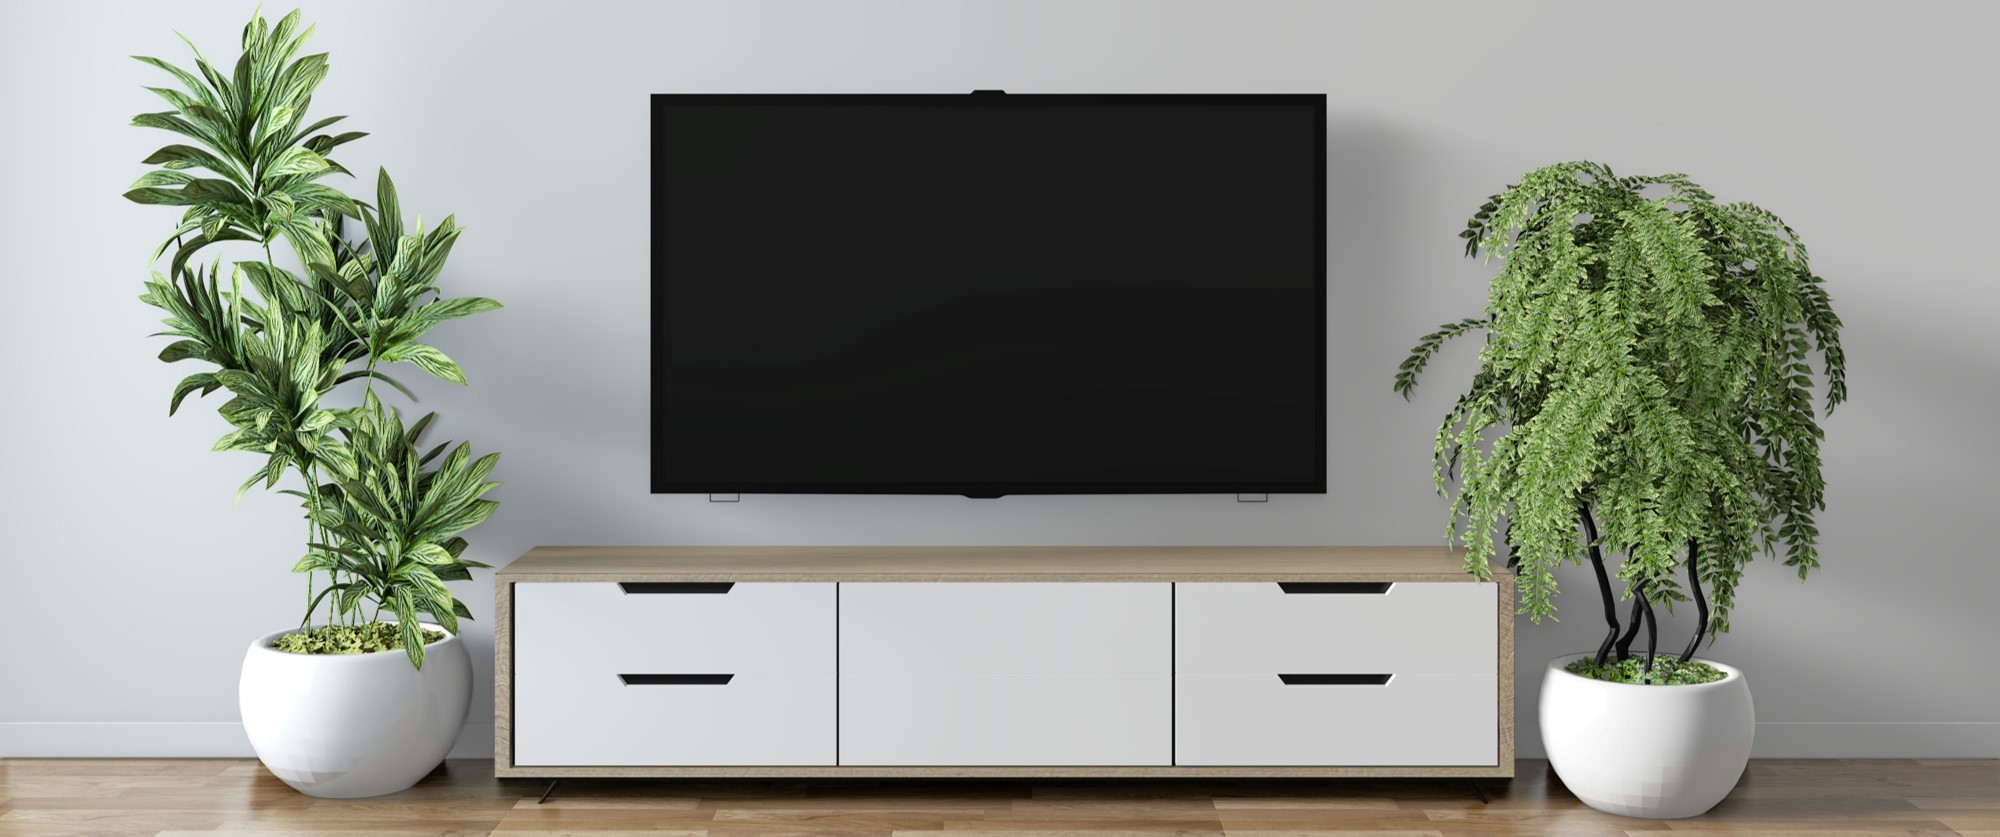 TV CABINETS AND OTHER MEDIA